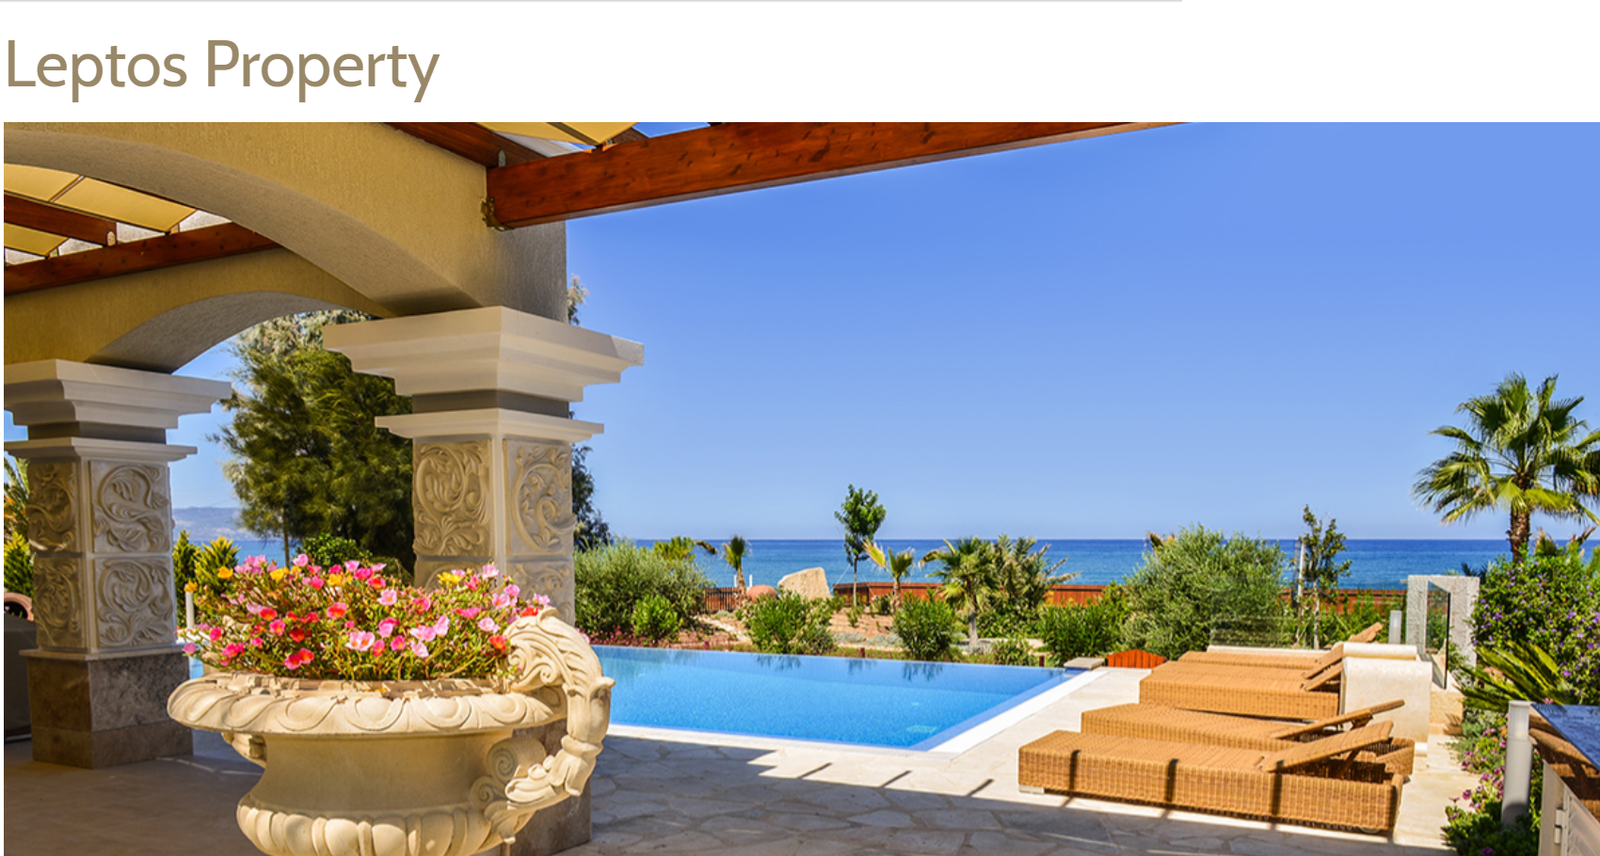 Leptos Estate one of the leading Developer in Cyprus Property Market  